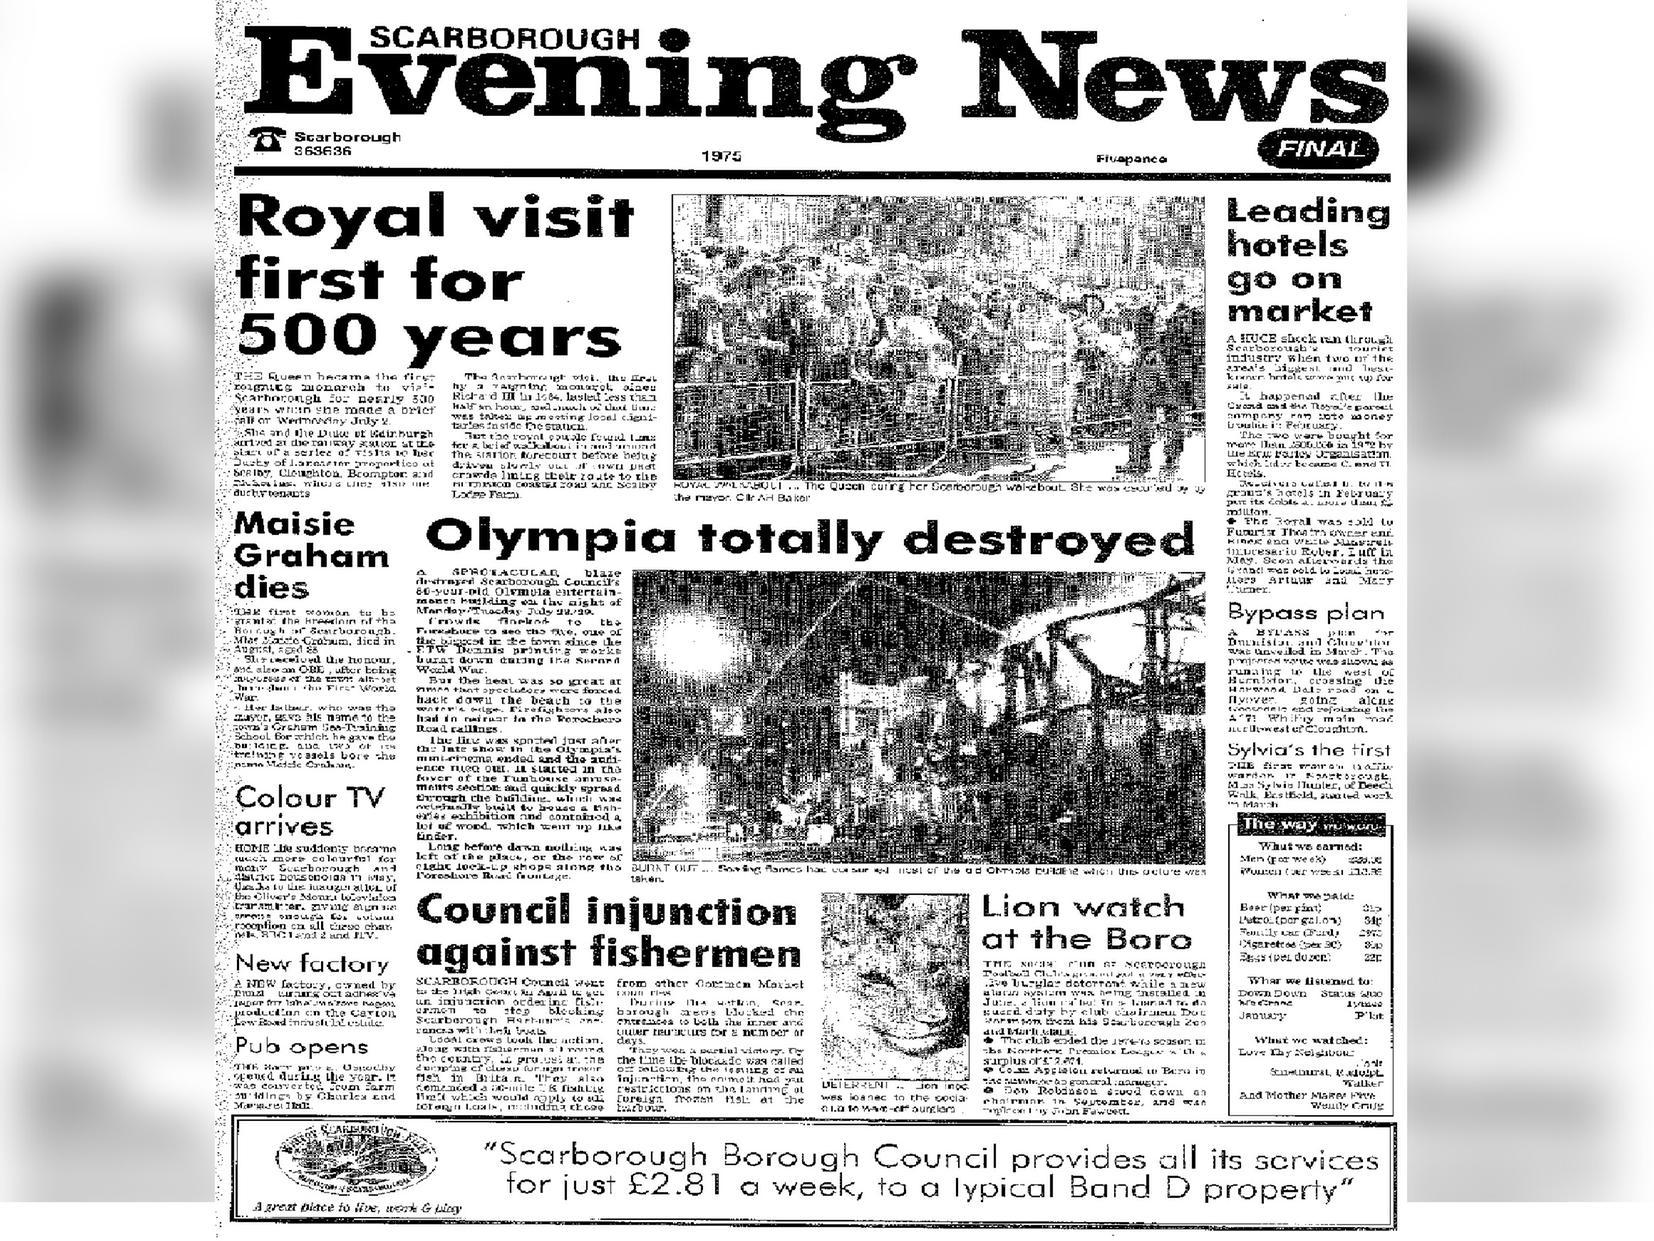 On July 2 1975 the Queen visited Scarborough. It was the first time a reigning monarch had visited the town in nearly 500 years. Also in that year, a huge blaze destroyed much of the Olympia.